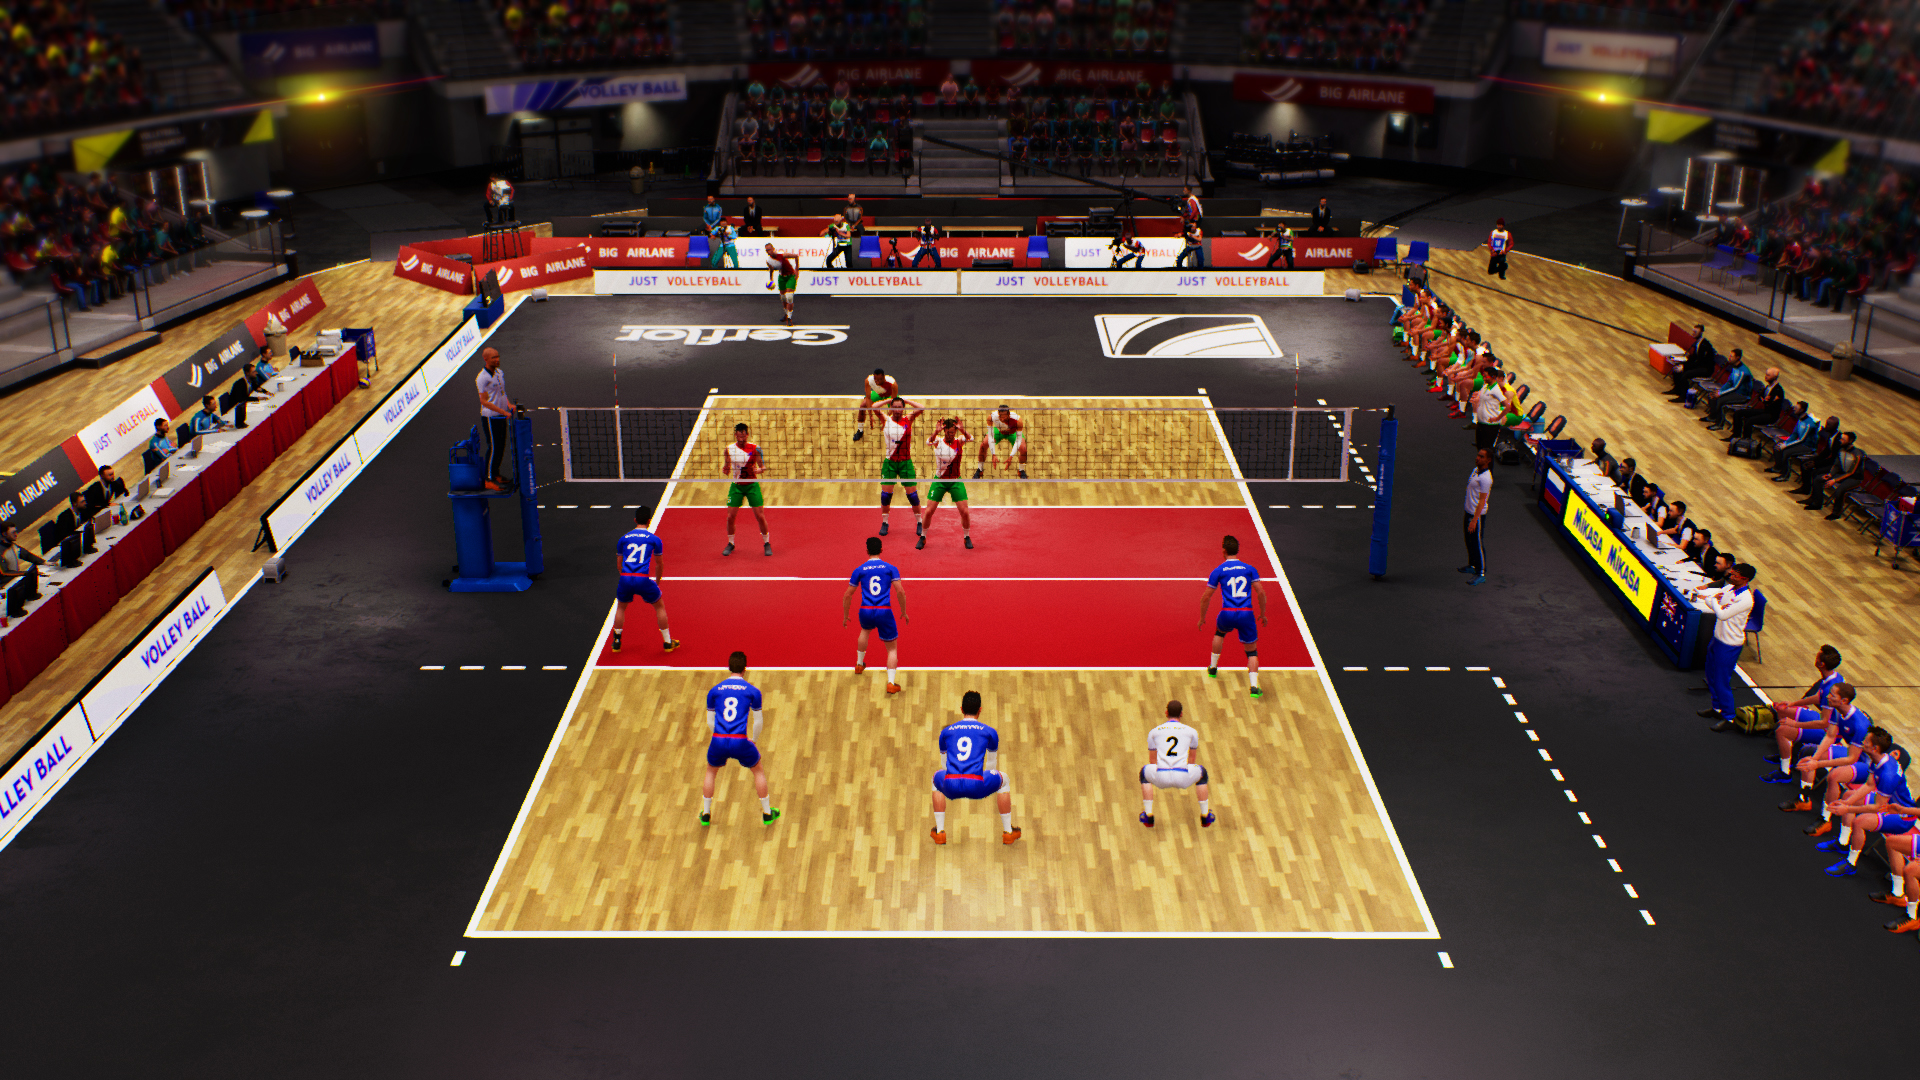 volleyball games online free